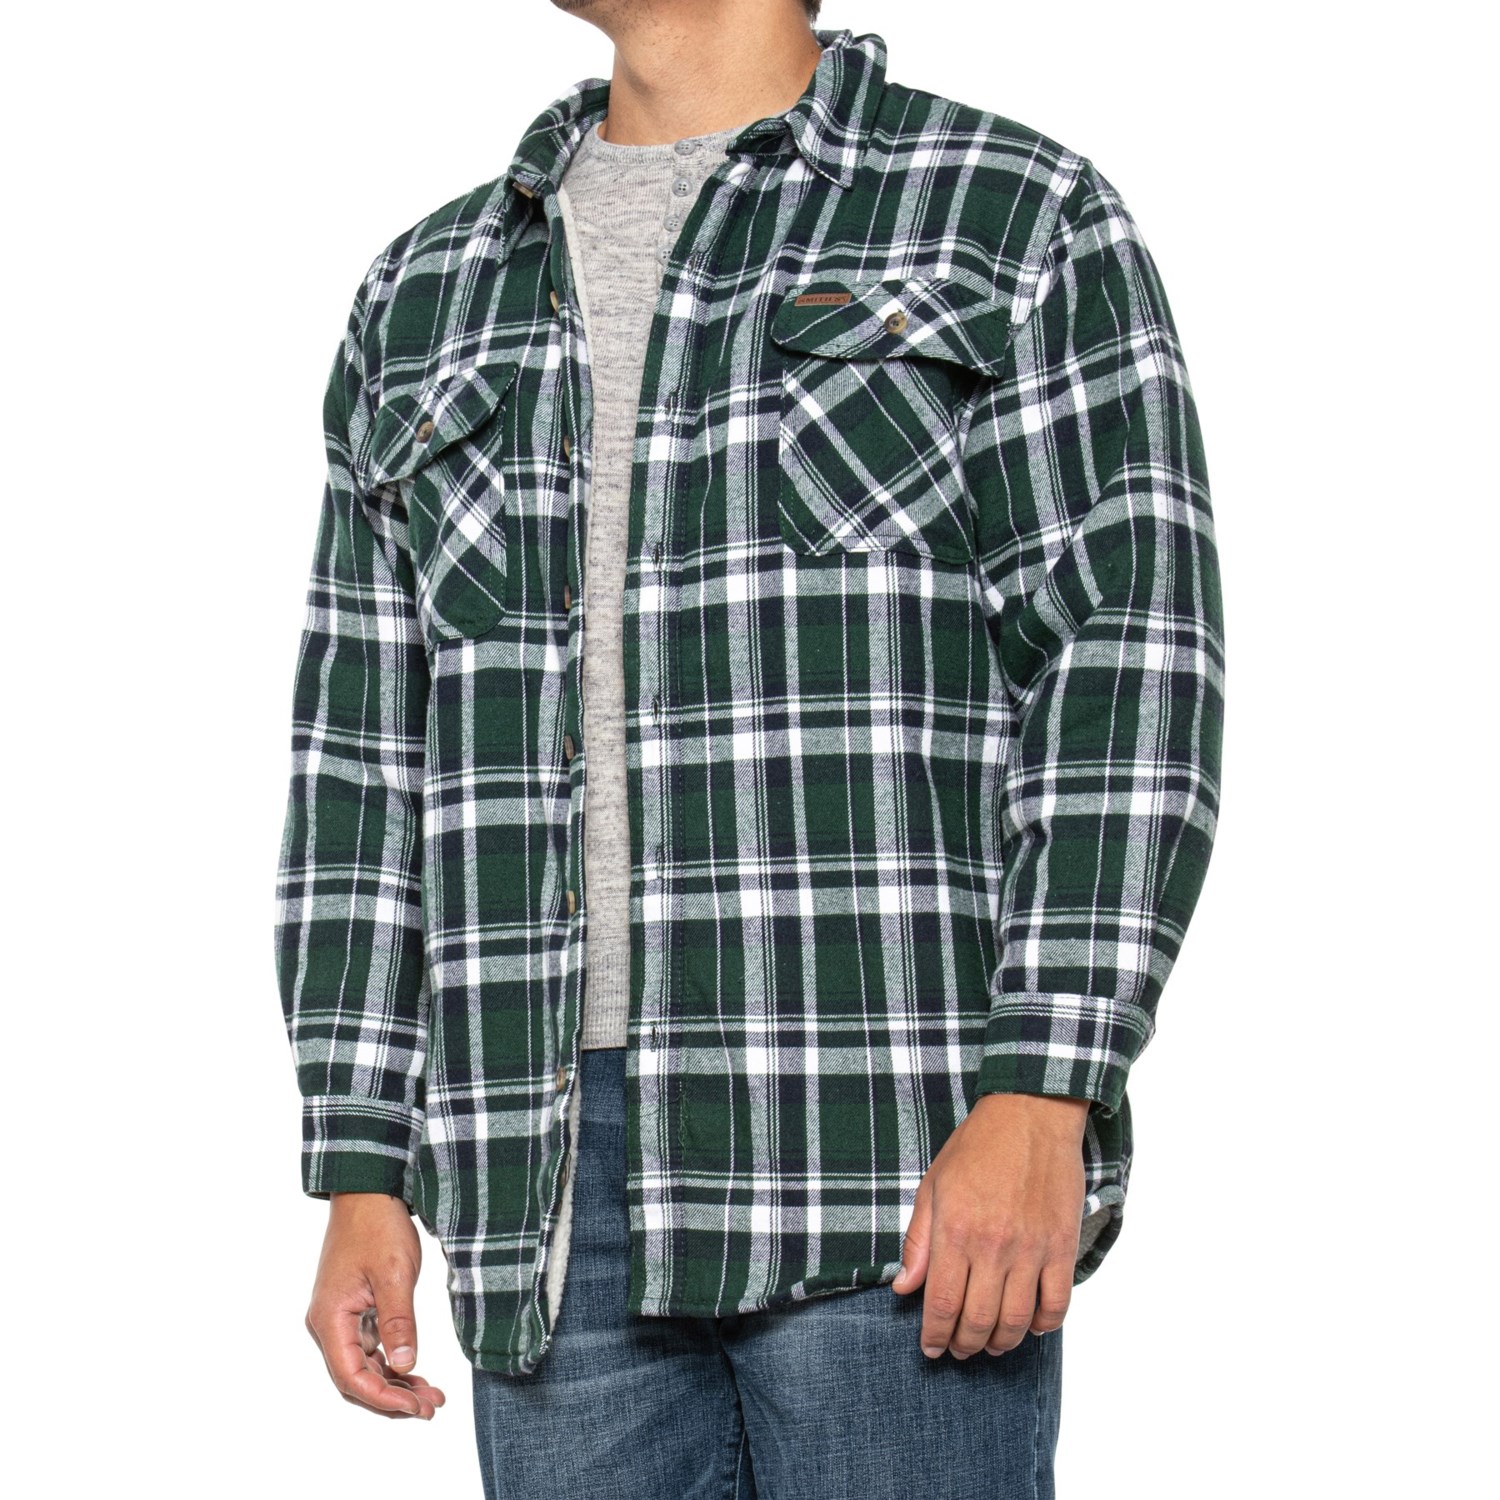 Smith's Workwear Flannel Shirt Jacket (For Men) - Save 52%